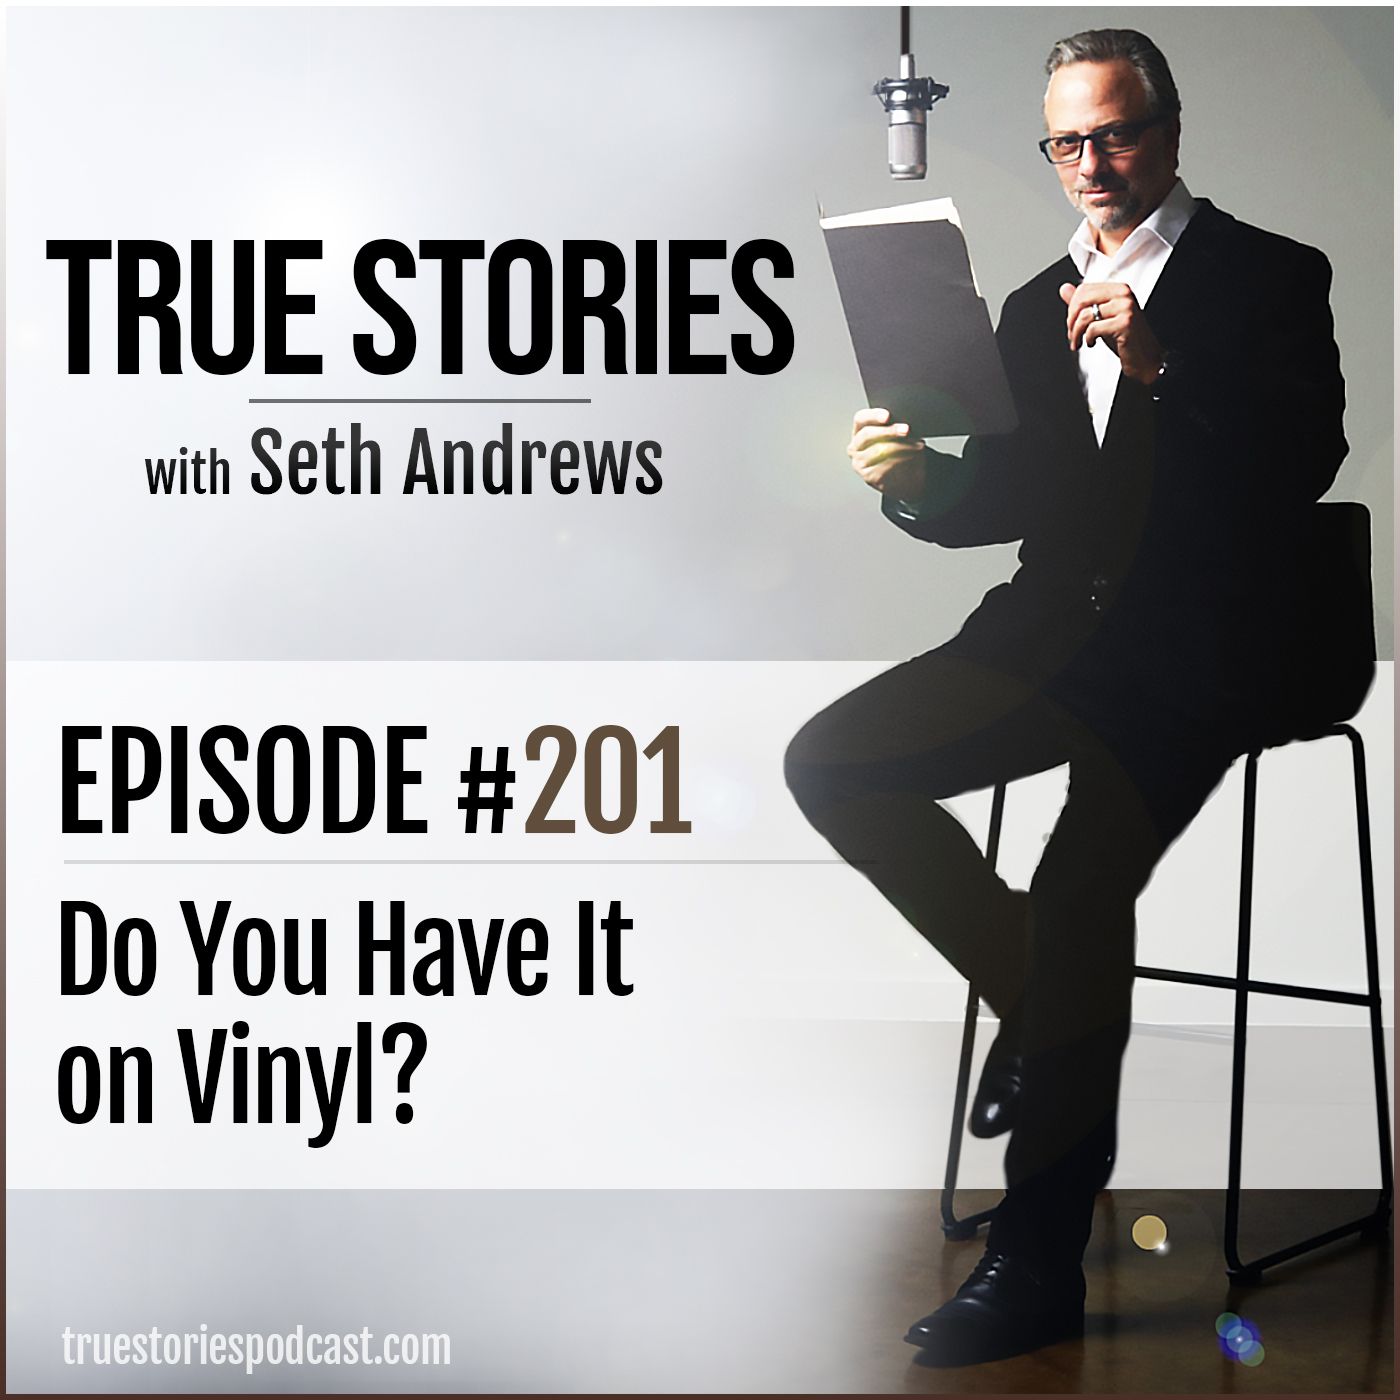 True Stories #201 - Do You Have It on Vinyl?